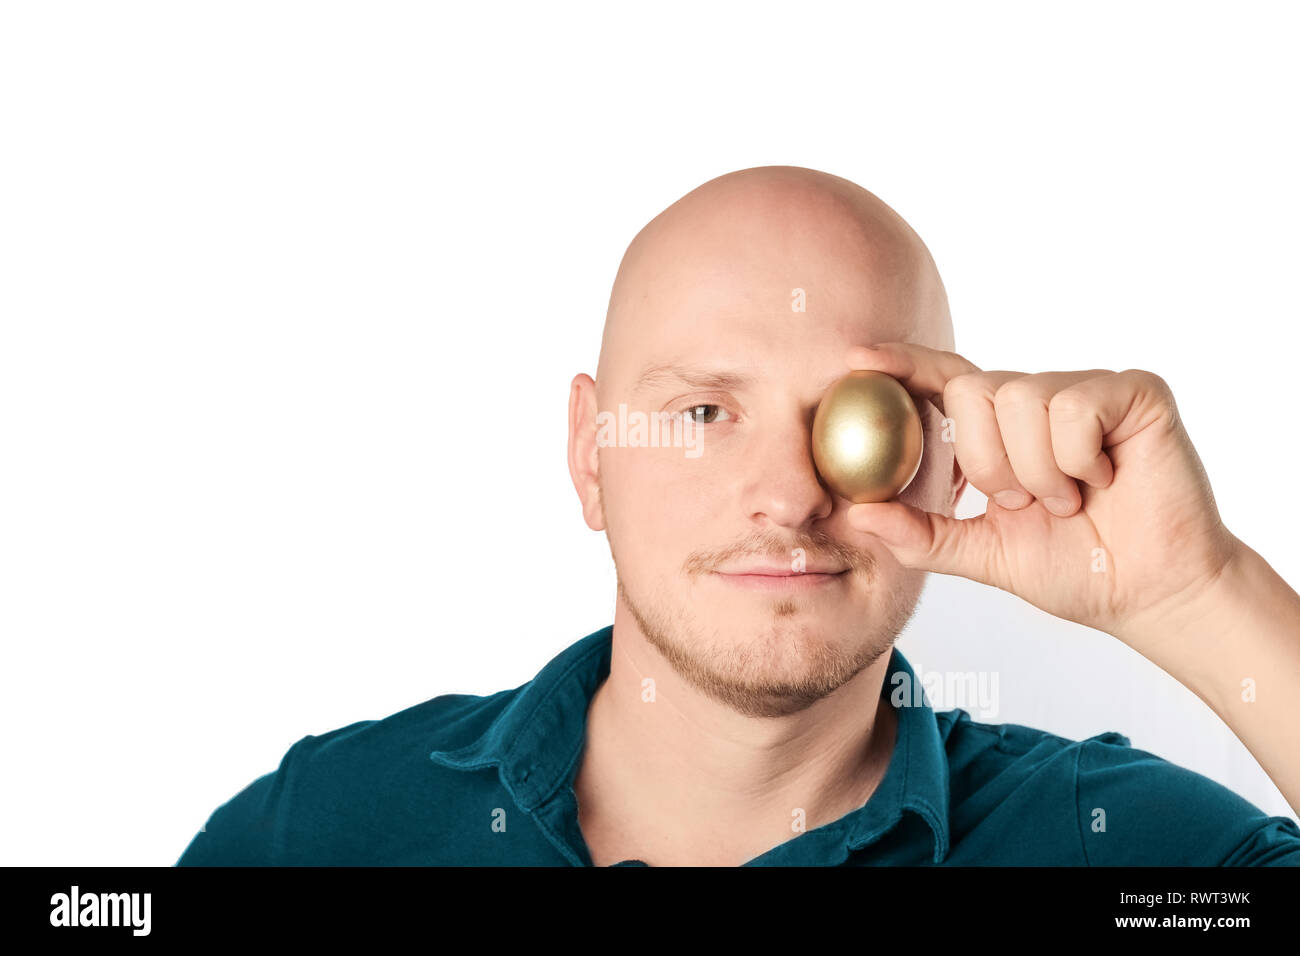 Young man with blue shirt holding golden egg to the camera, feeling confident., feeling confident. Studio shot on a white background Stock Photo